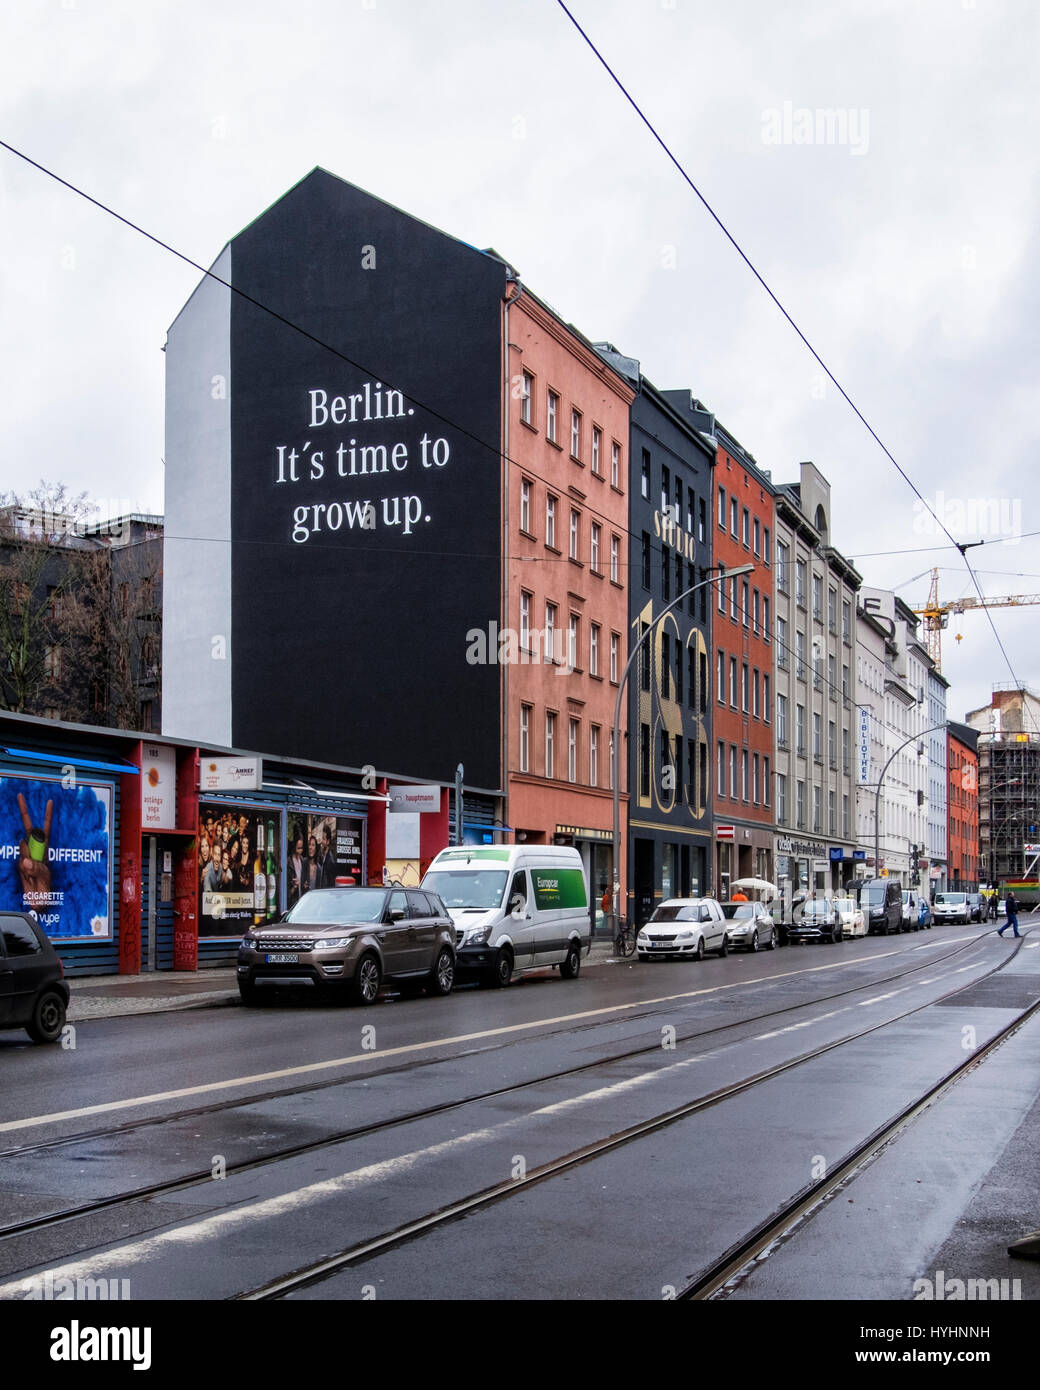 Berlin, Mitte. Mercedes Benz mural advertisement with advertising slogan 'Berlin it's time to grow up'. Luxury motor car ad in city street. Stock Photo